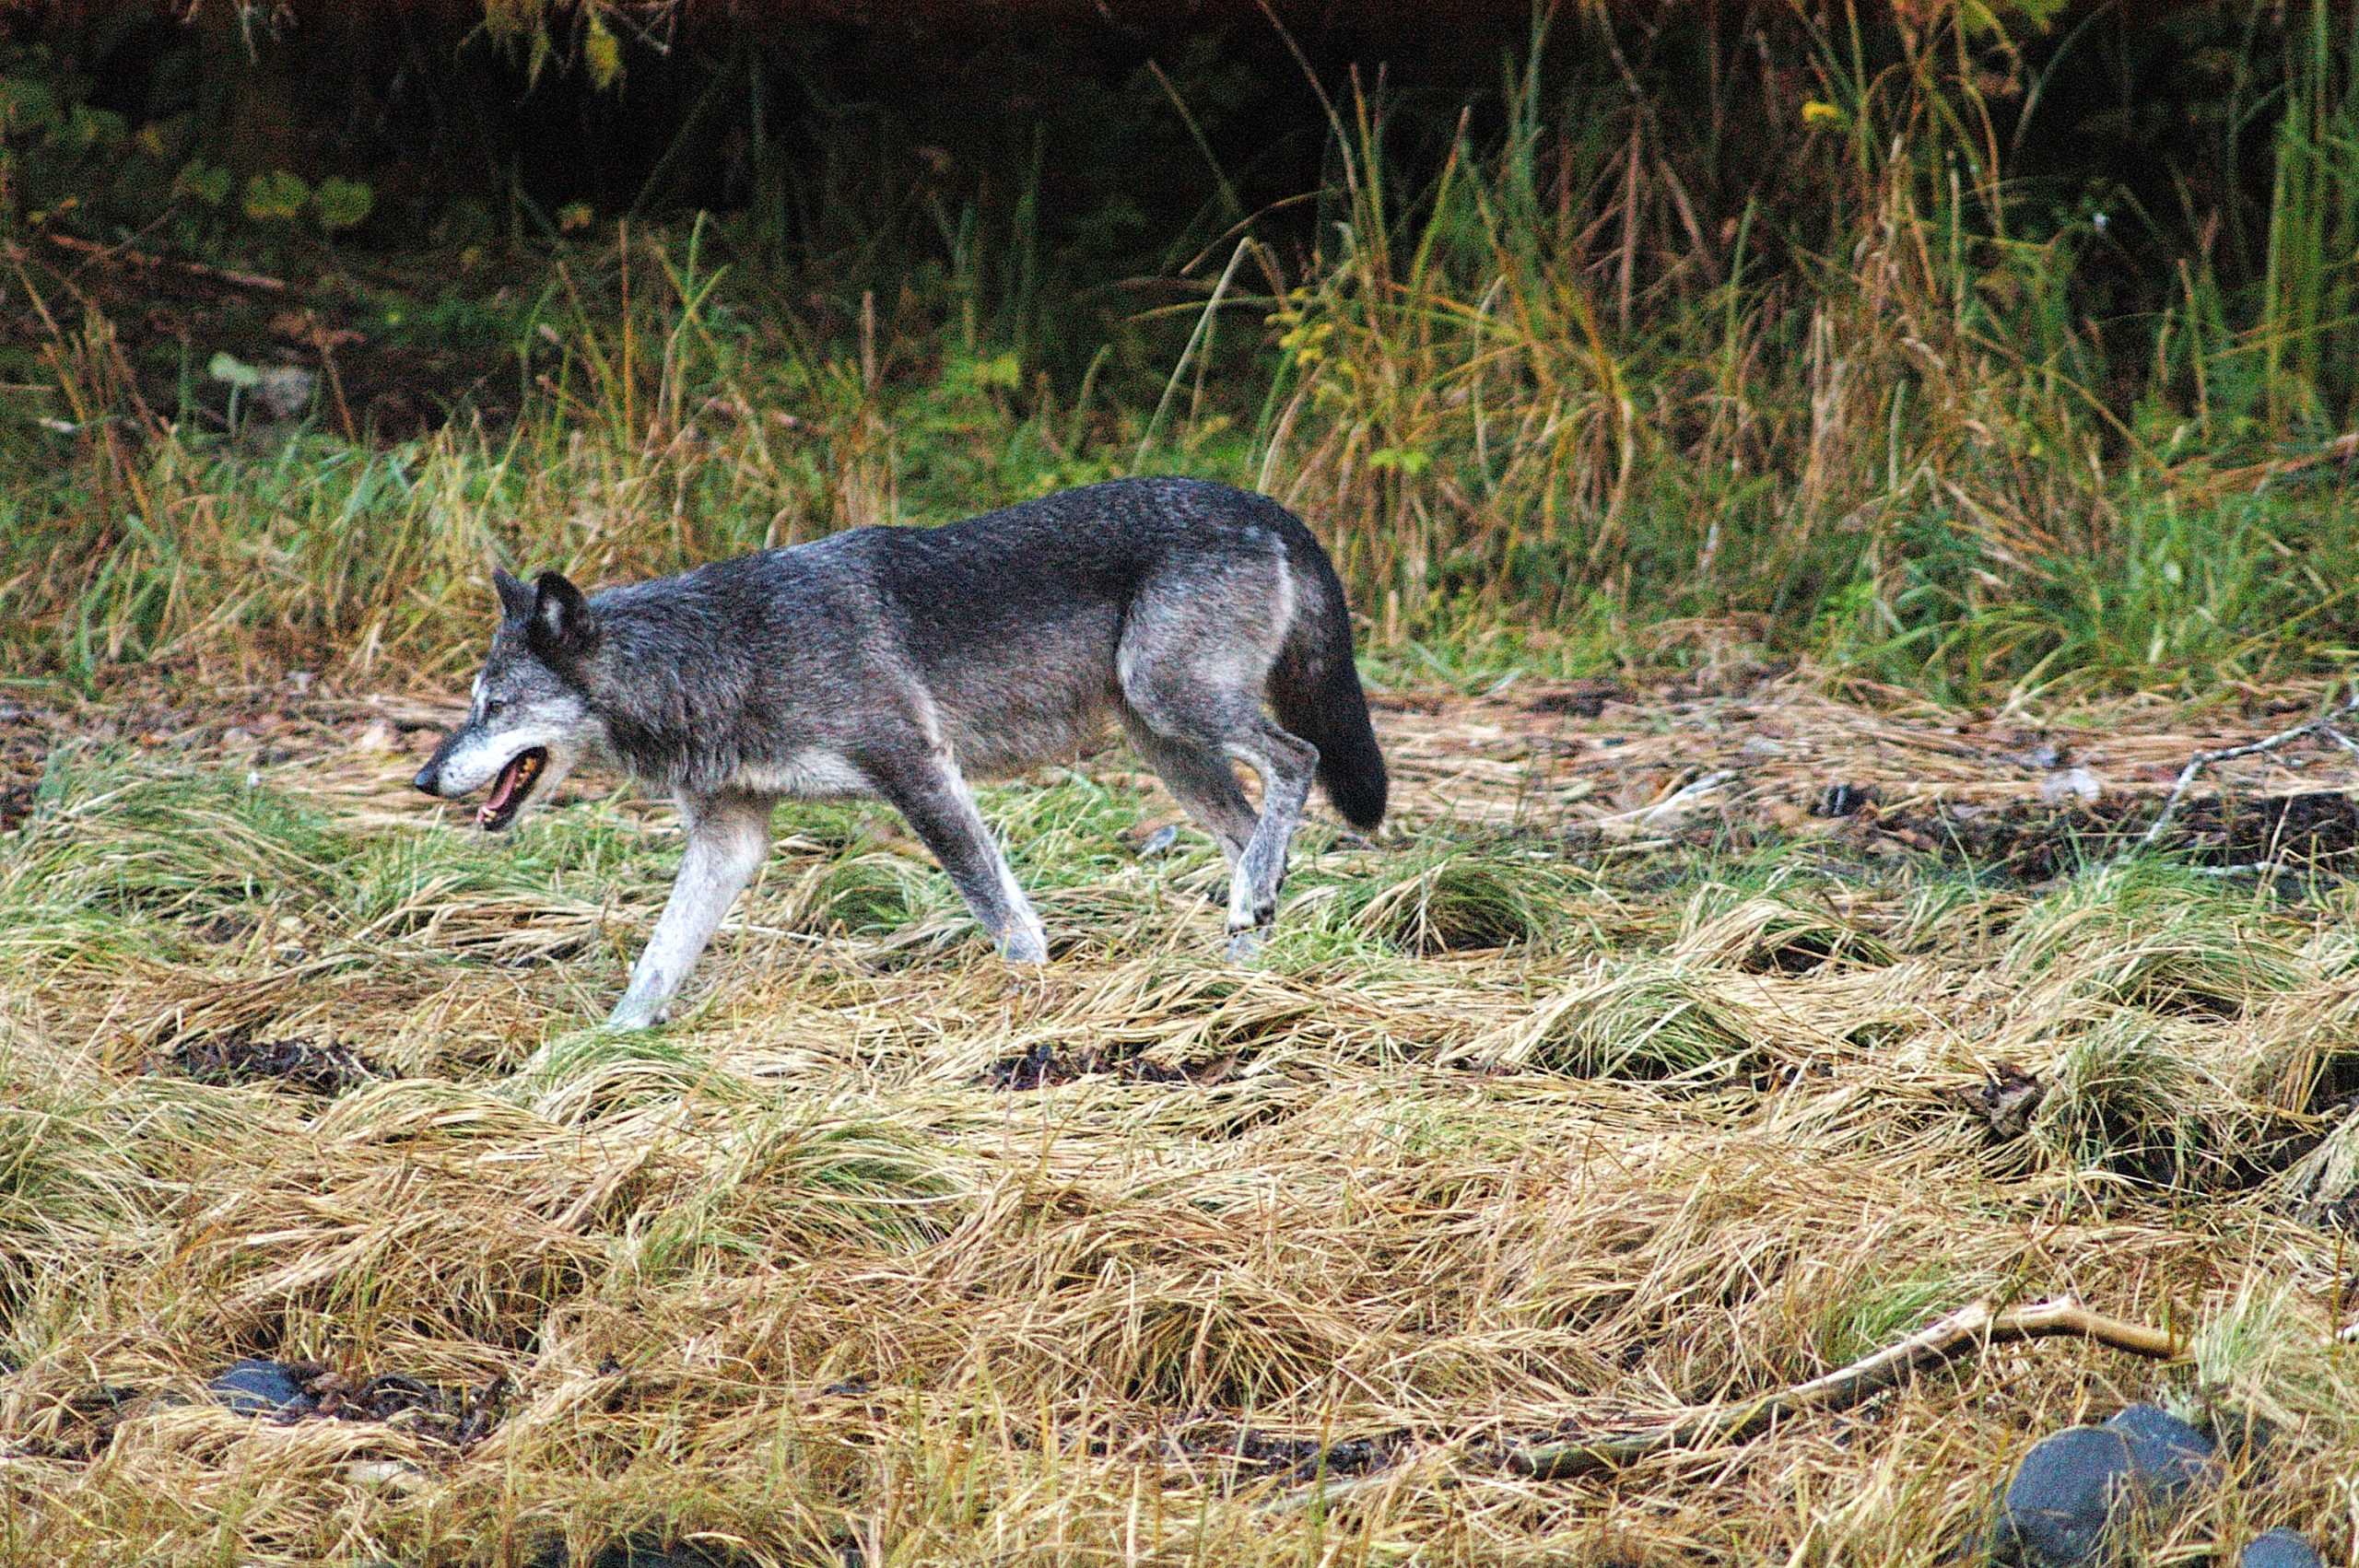 Coastal Wolf with Grey and White Fur Walking in Grassy Landscape in Coastal BC